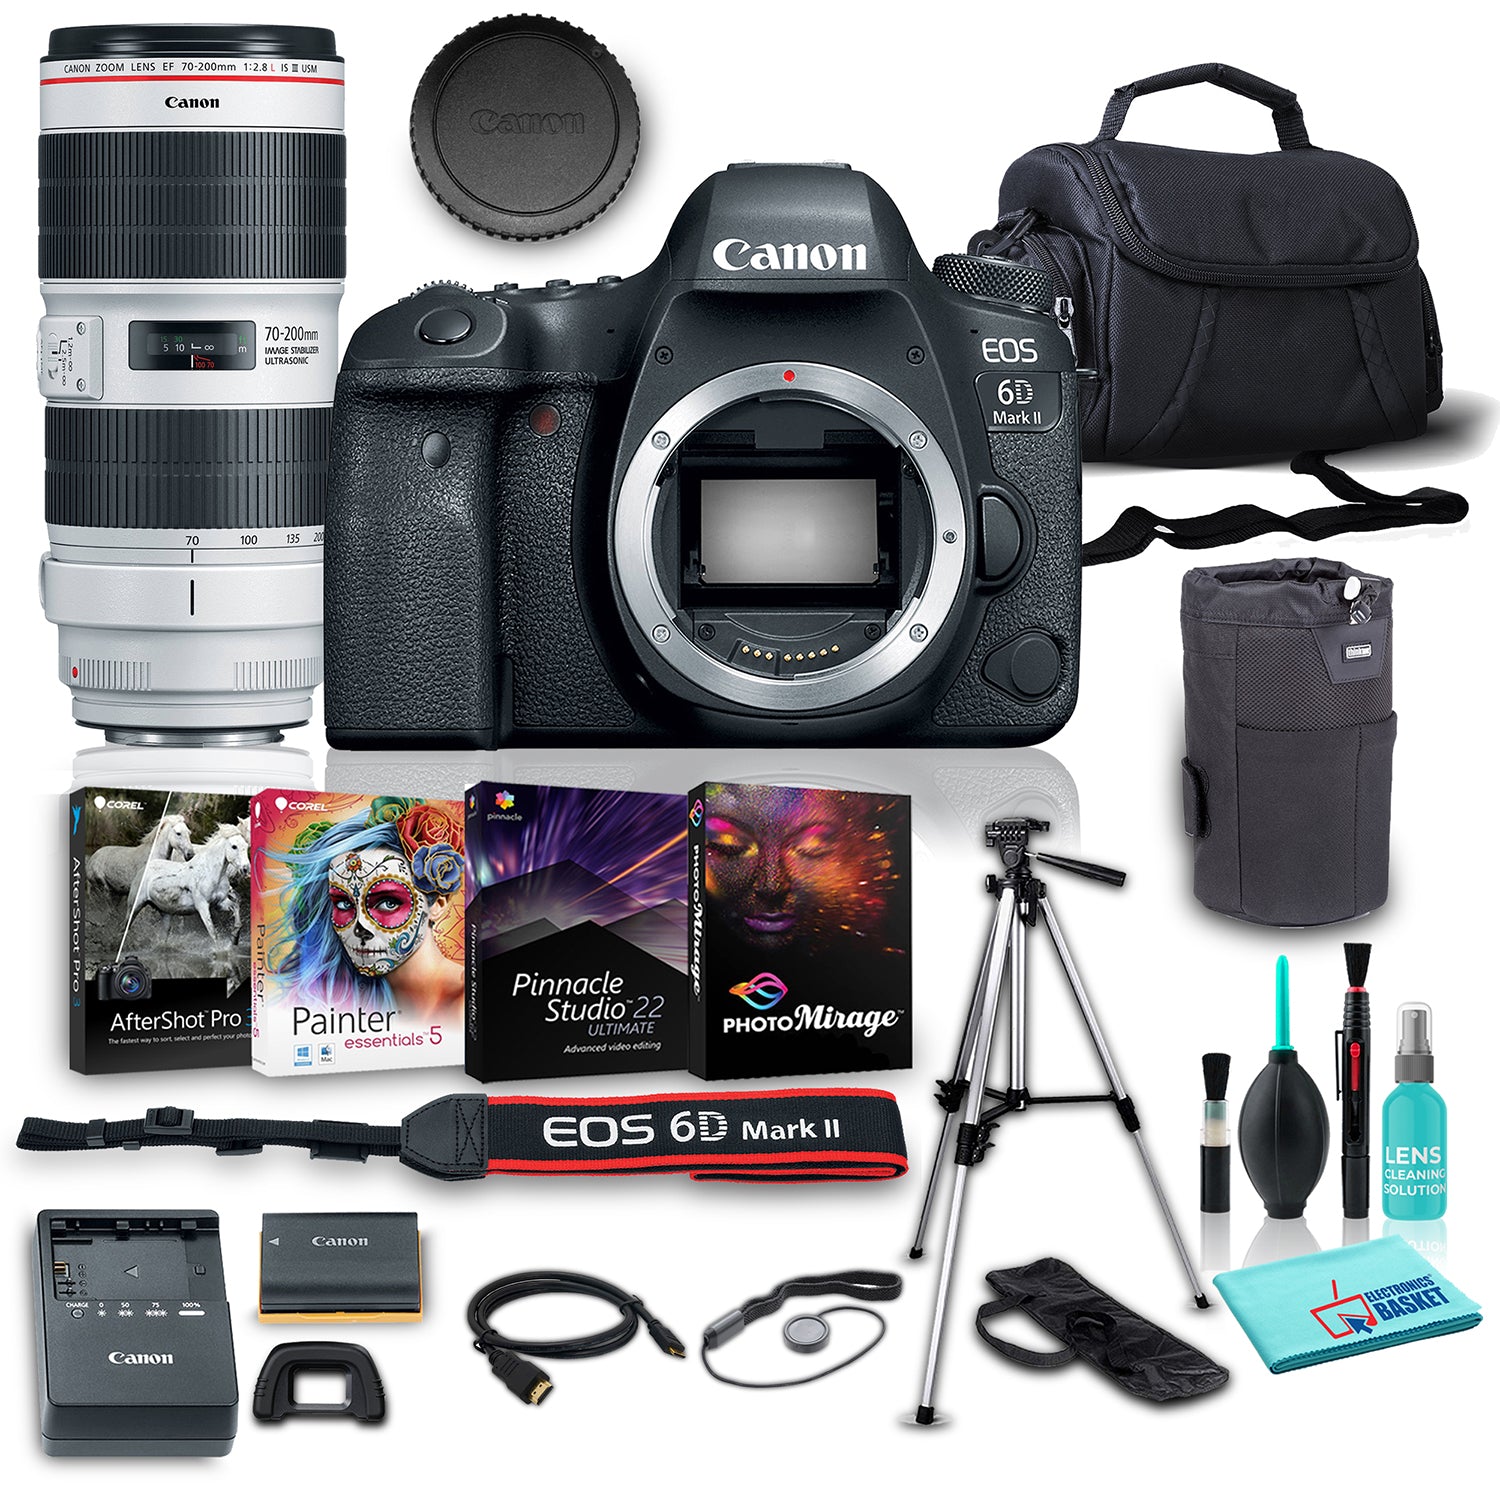 Canon EOS 6D Mark II DSLR Camera (Body Only) w/ Canon EF 70-200mm f/2.8L IS III USM Lens Bundle w/ 8 Piece Accessories